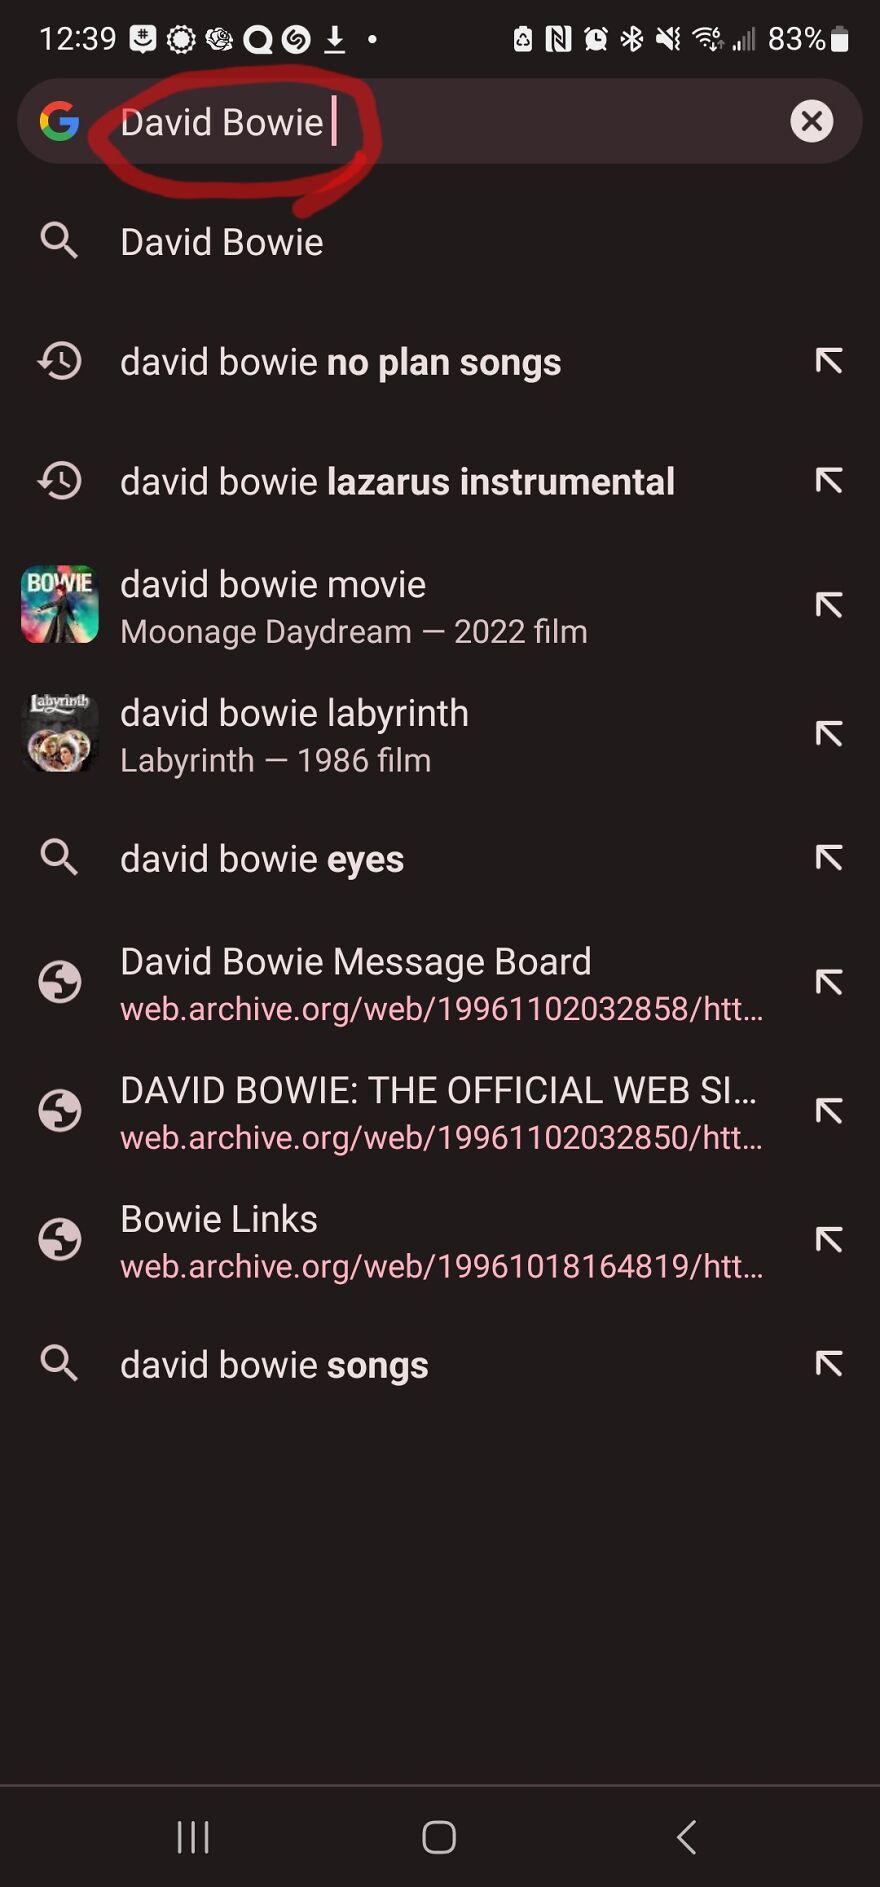 How To Comment With An Image Using Your Phone (Featuring David Bowie!)